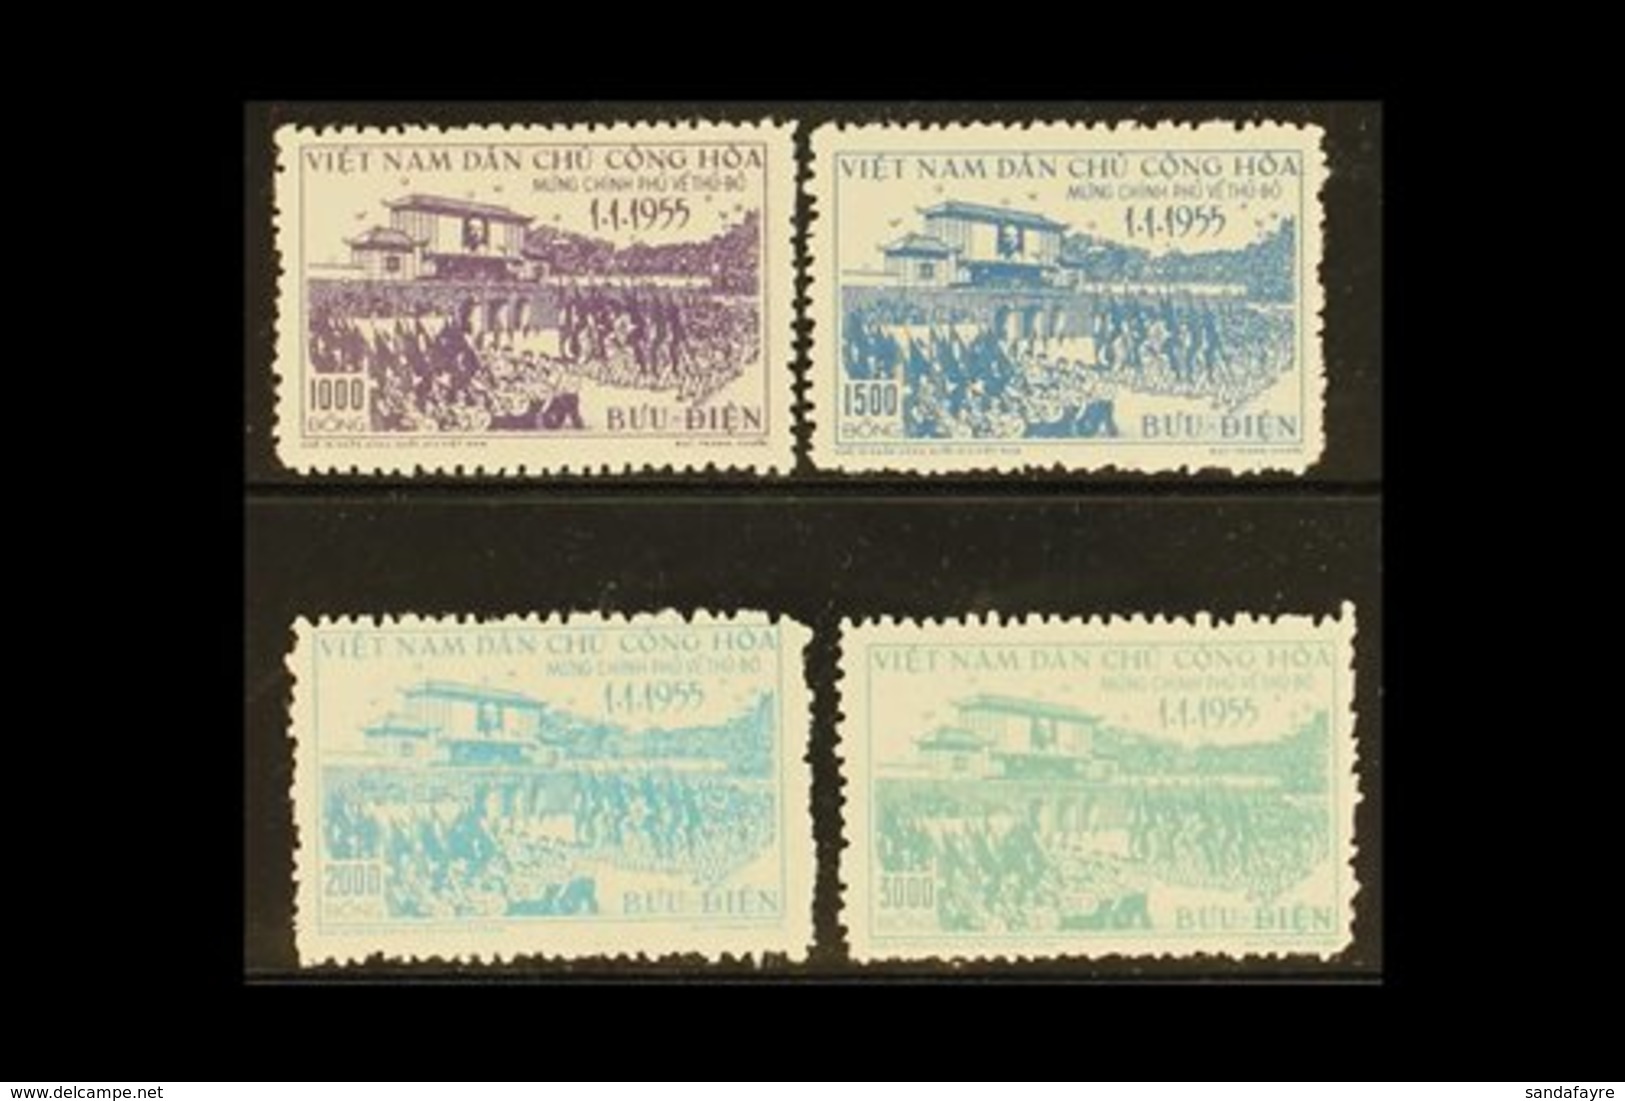 1956 Return Of Government To Hanoi, Complete Set. SG N42/45, Scott 28/31, Very Fine Unused, No Gum As Issued And Free Fr - Viêt-Nam